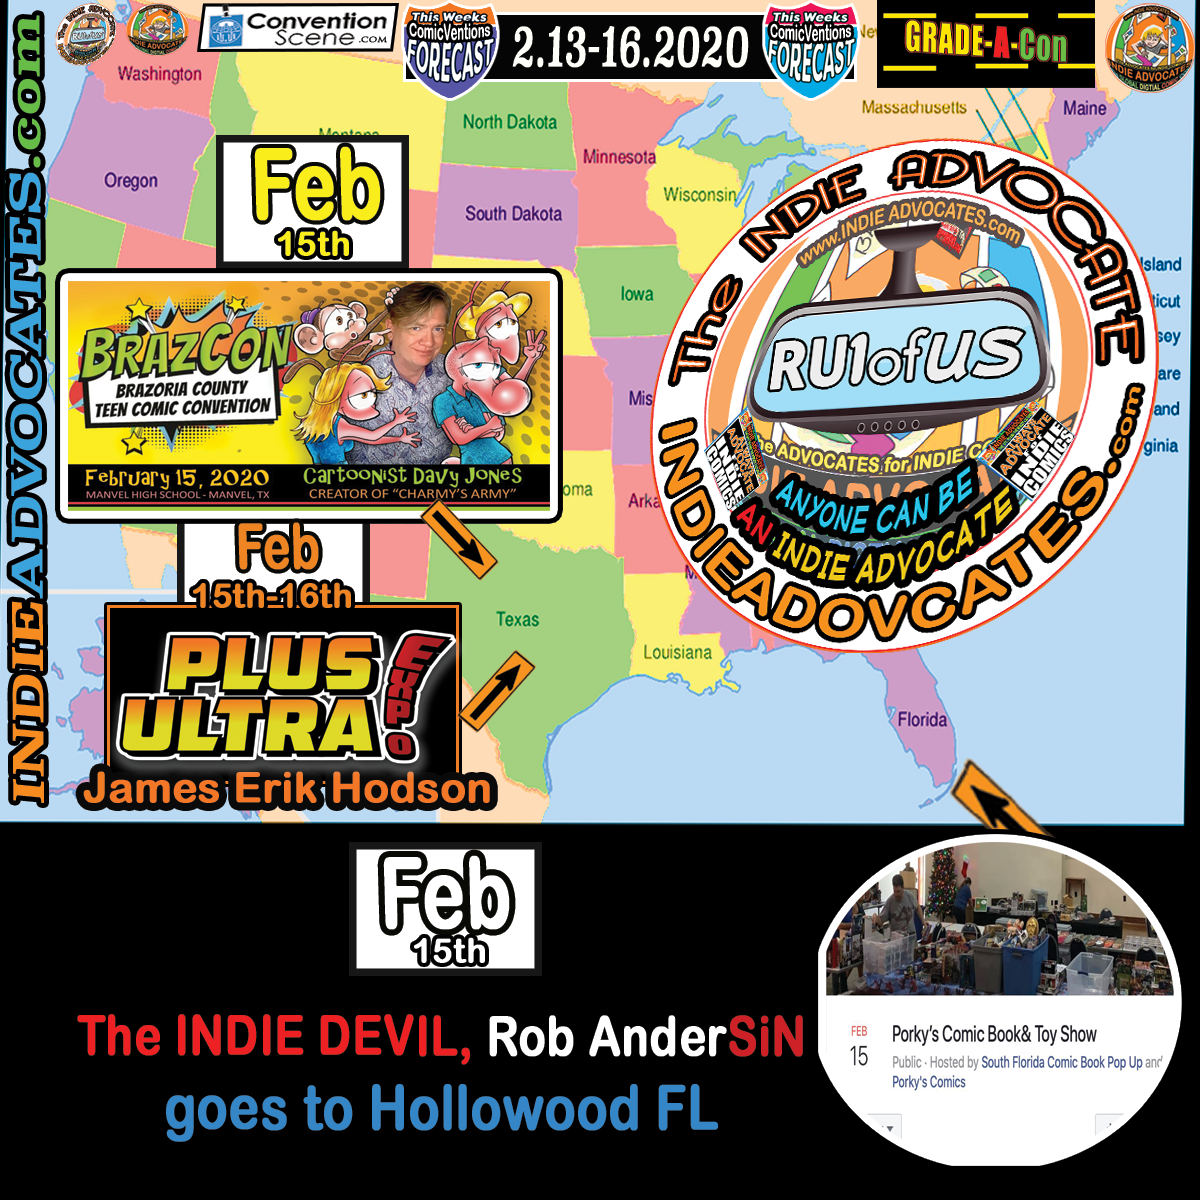 2020 ComicVentions HIGHWAY EXITS:: [2.13-16] V-Day Conventions -BRAZON CON(TX) -Geeks of Color Expo(TX)-Porky’s Comic Book& Toy Show(FL) Plus Ultra Con (TX)